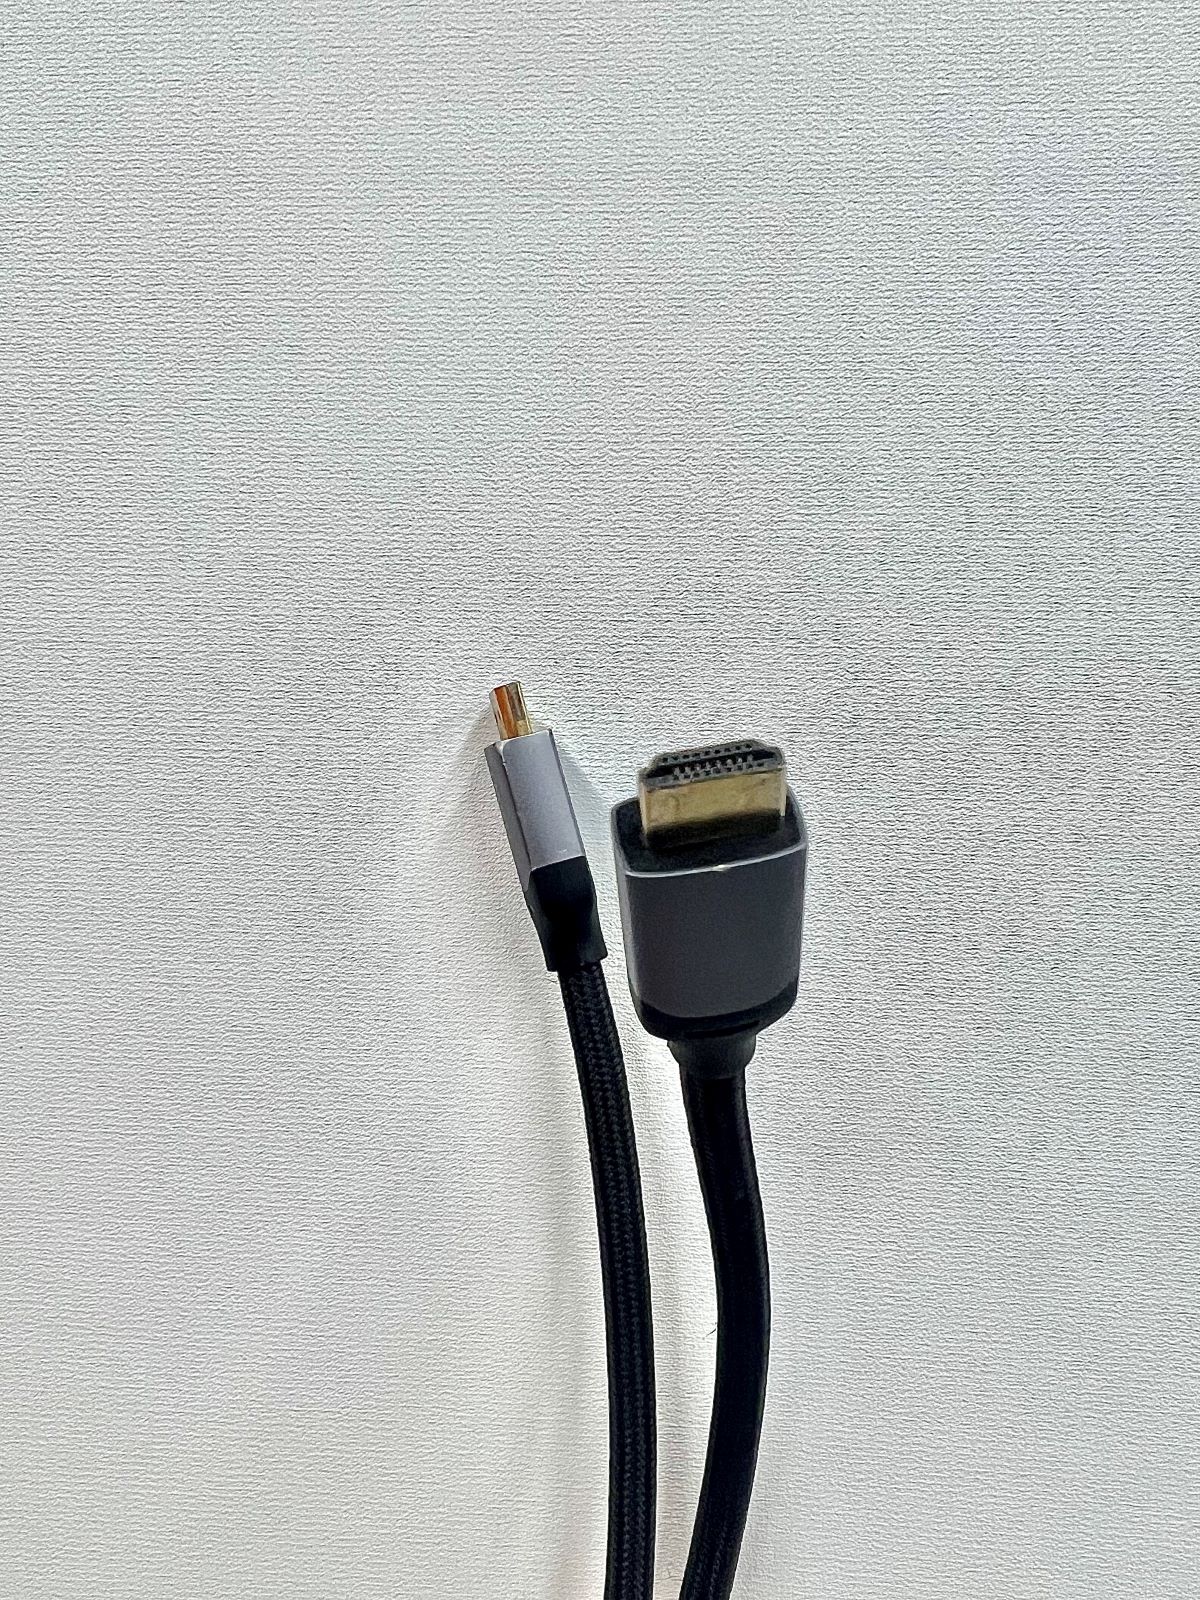 hdmi cable with a white background